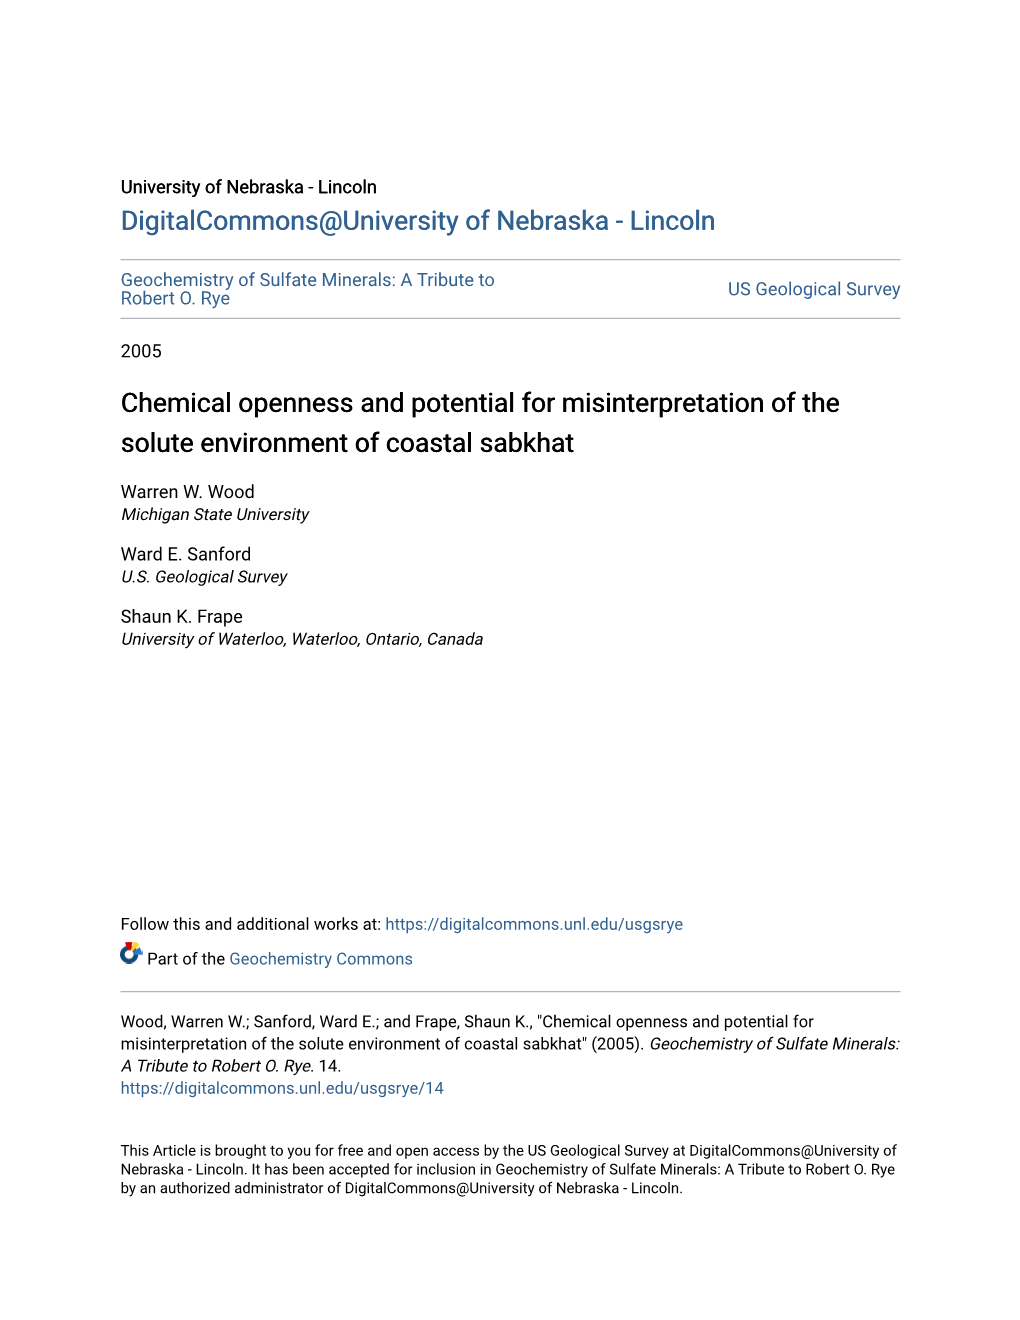 Chemical Openness and Potential for Misinterpretation of the Solute Environment of Coastal Sabkhat